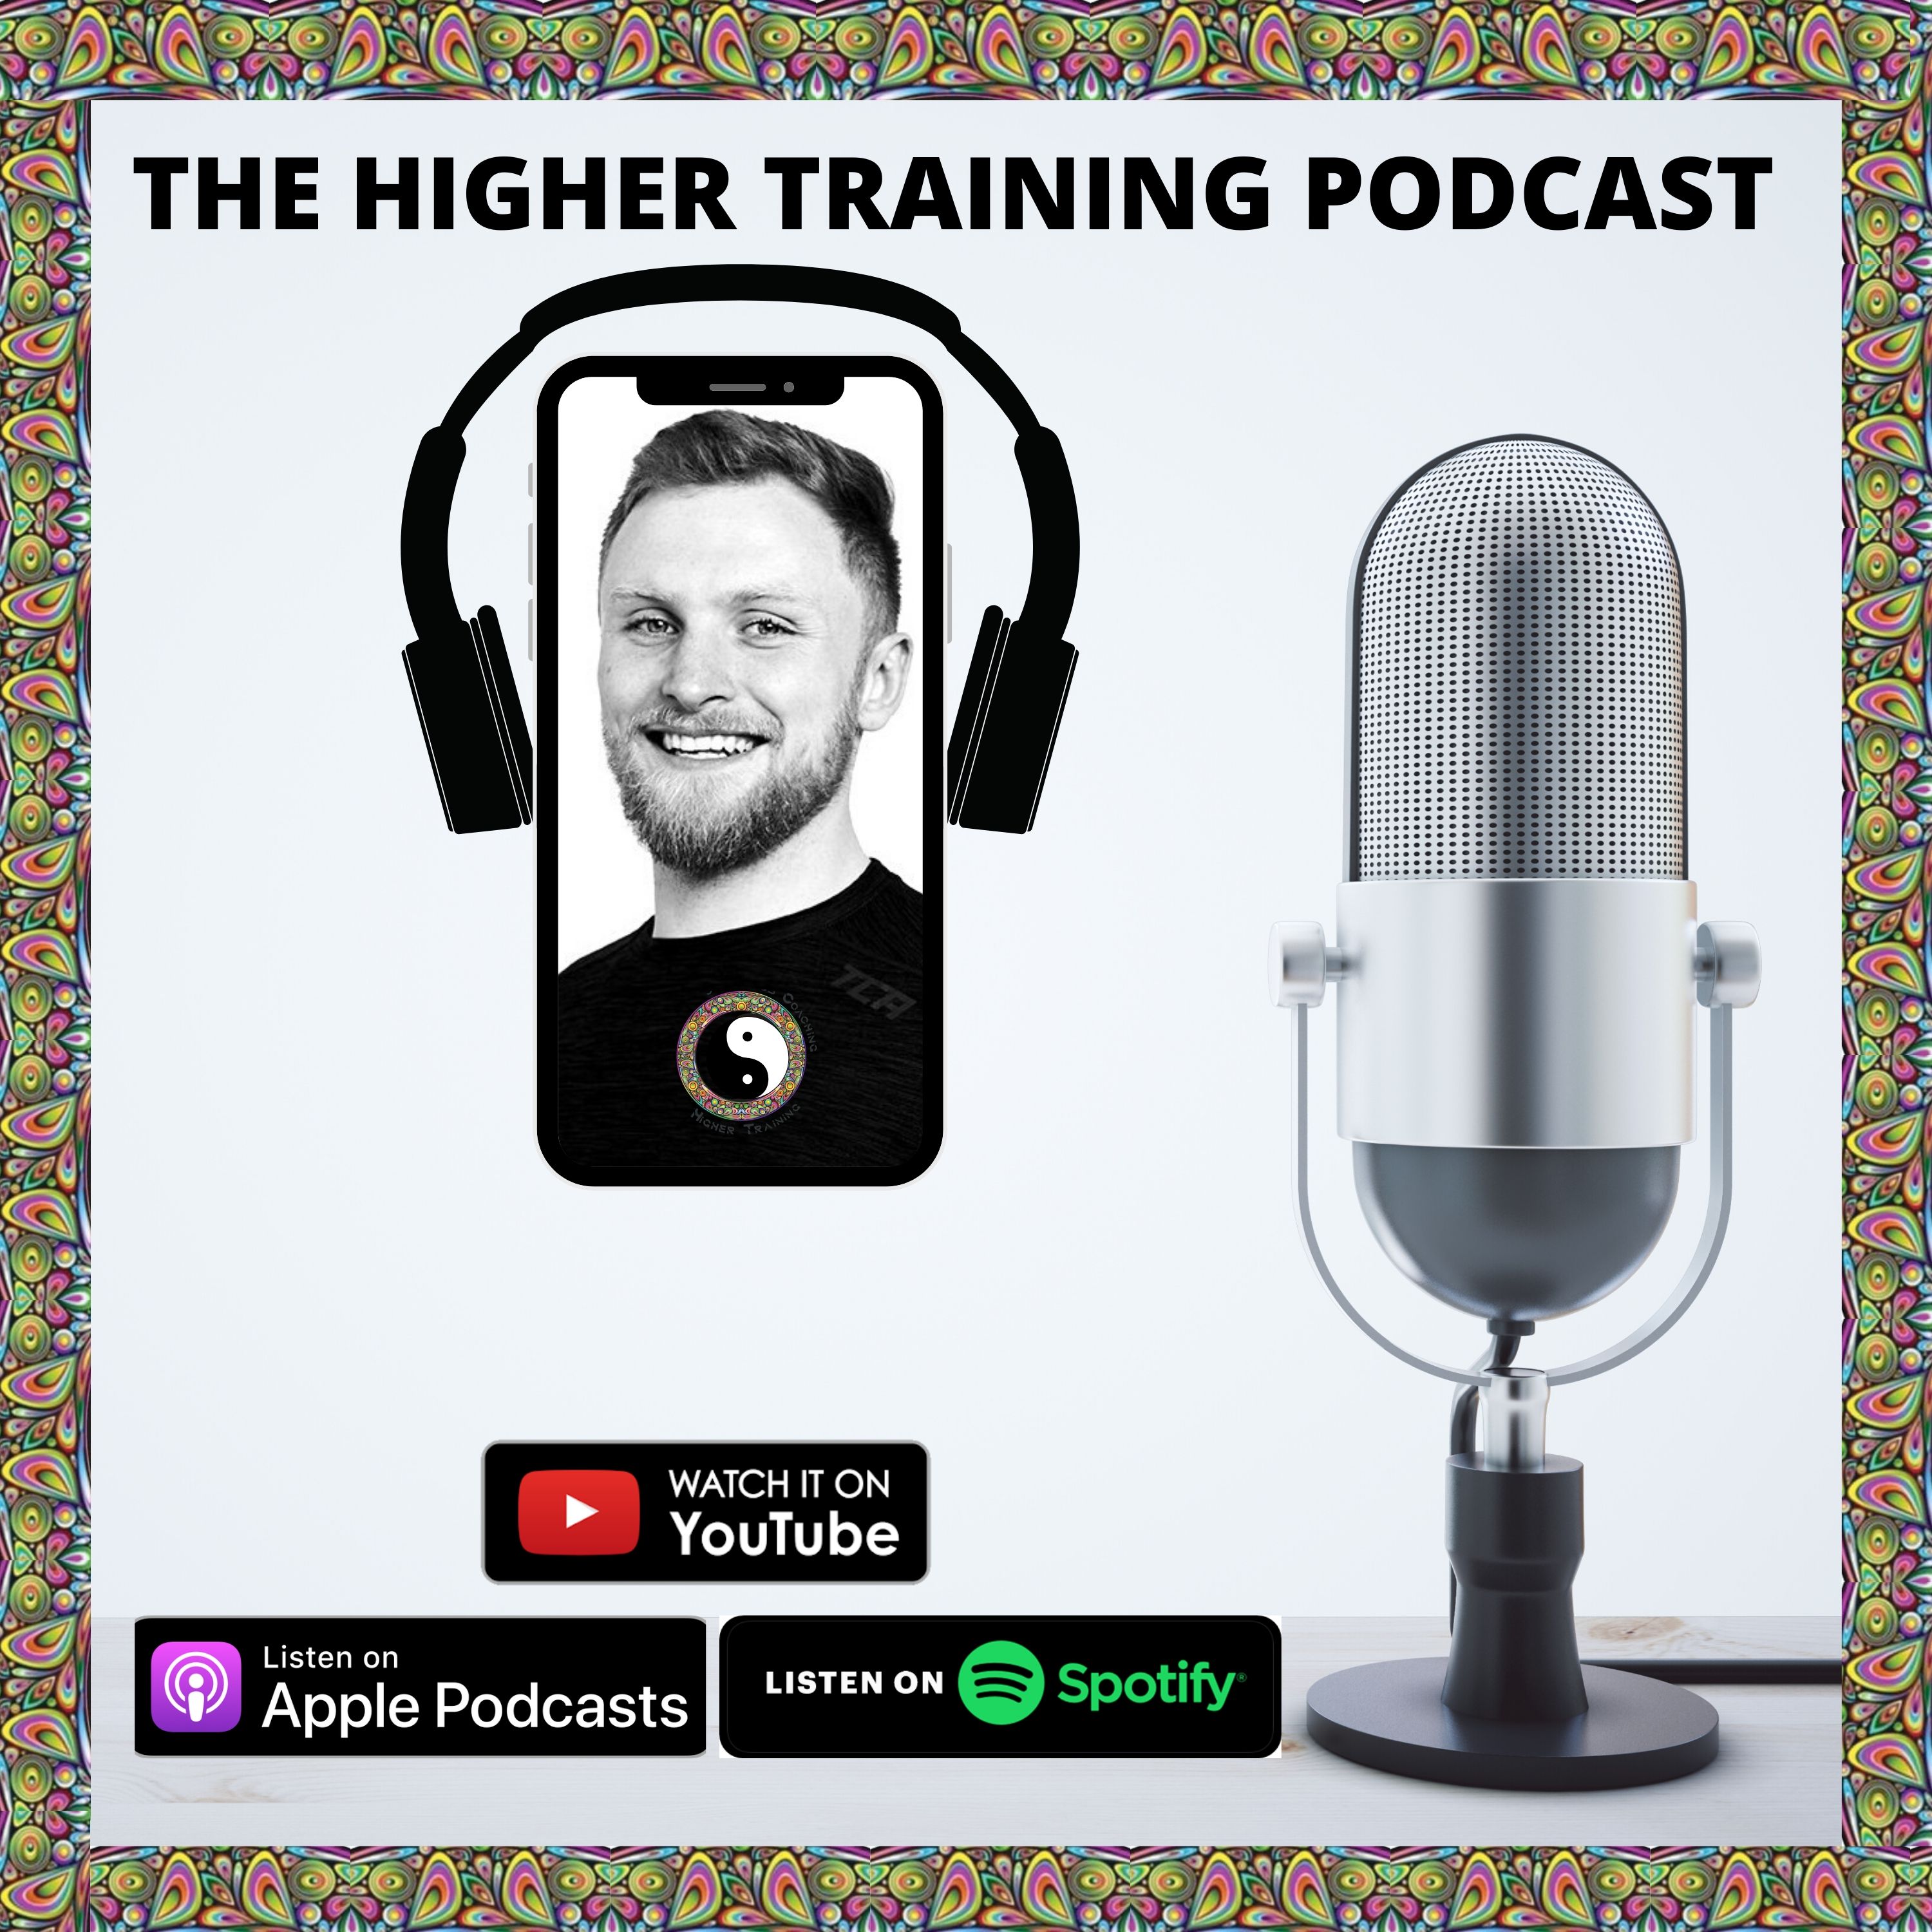 The Higher Training Podcast